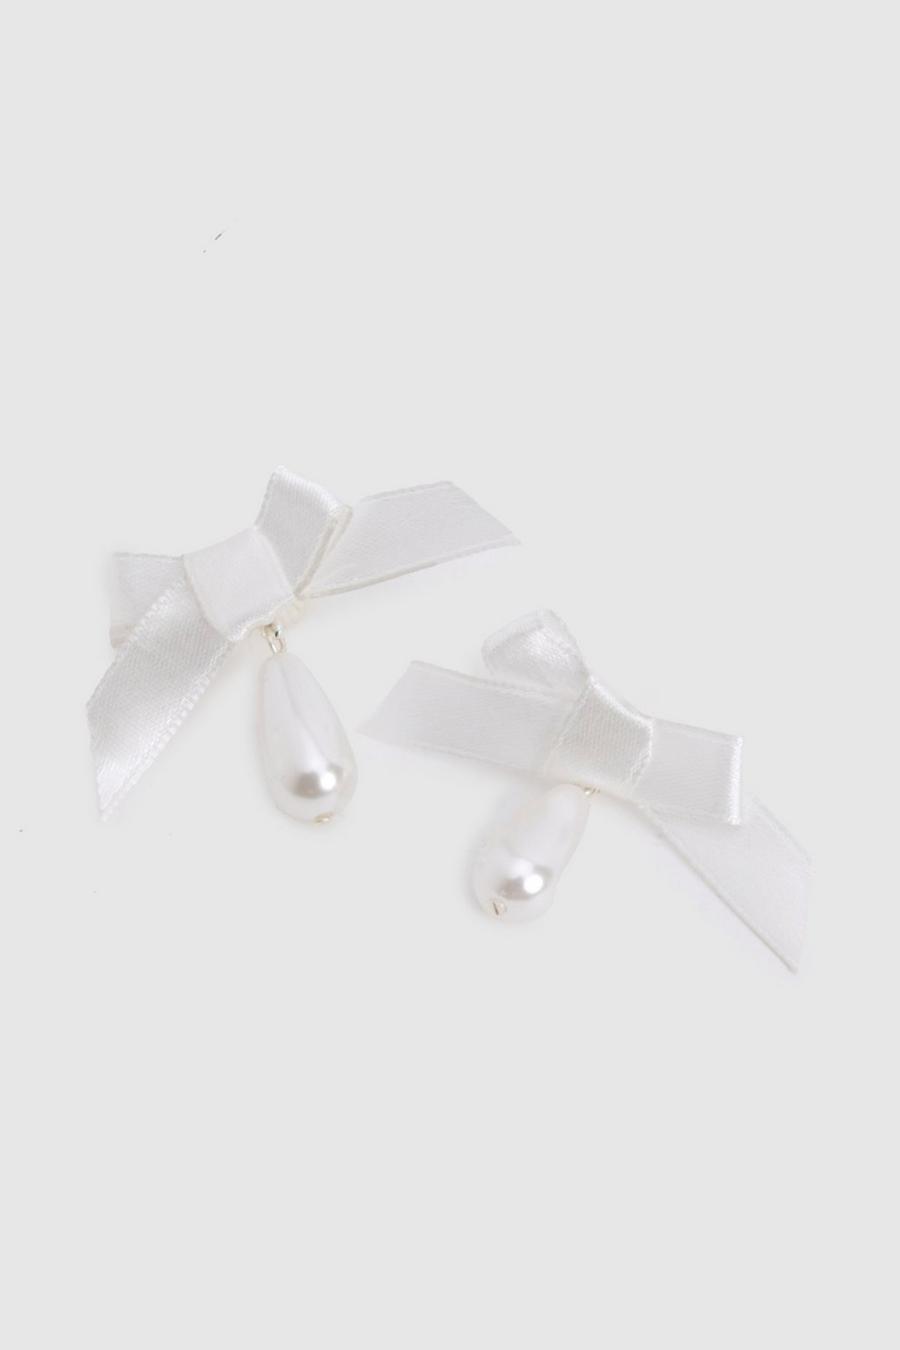 White Satin Bow & Pearl Statement Earrings  